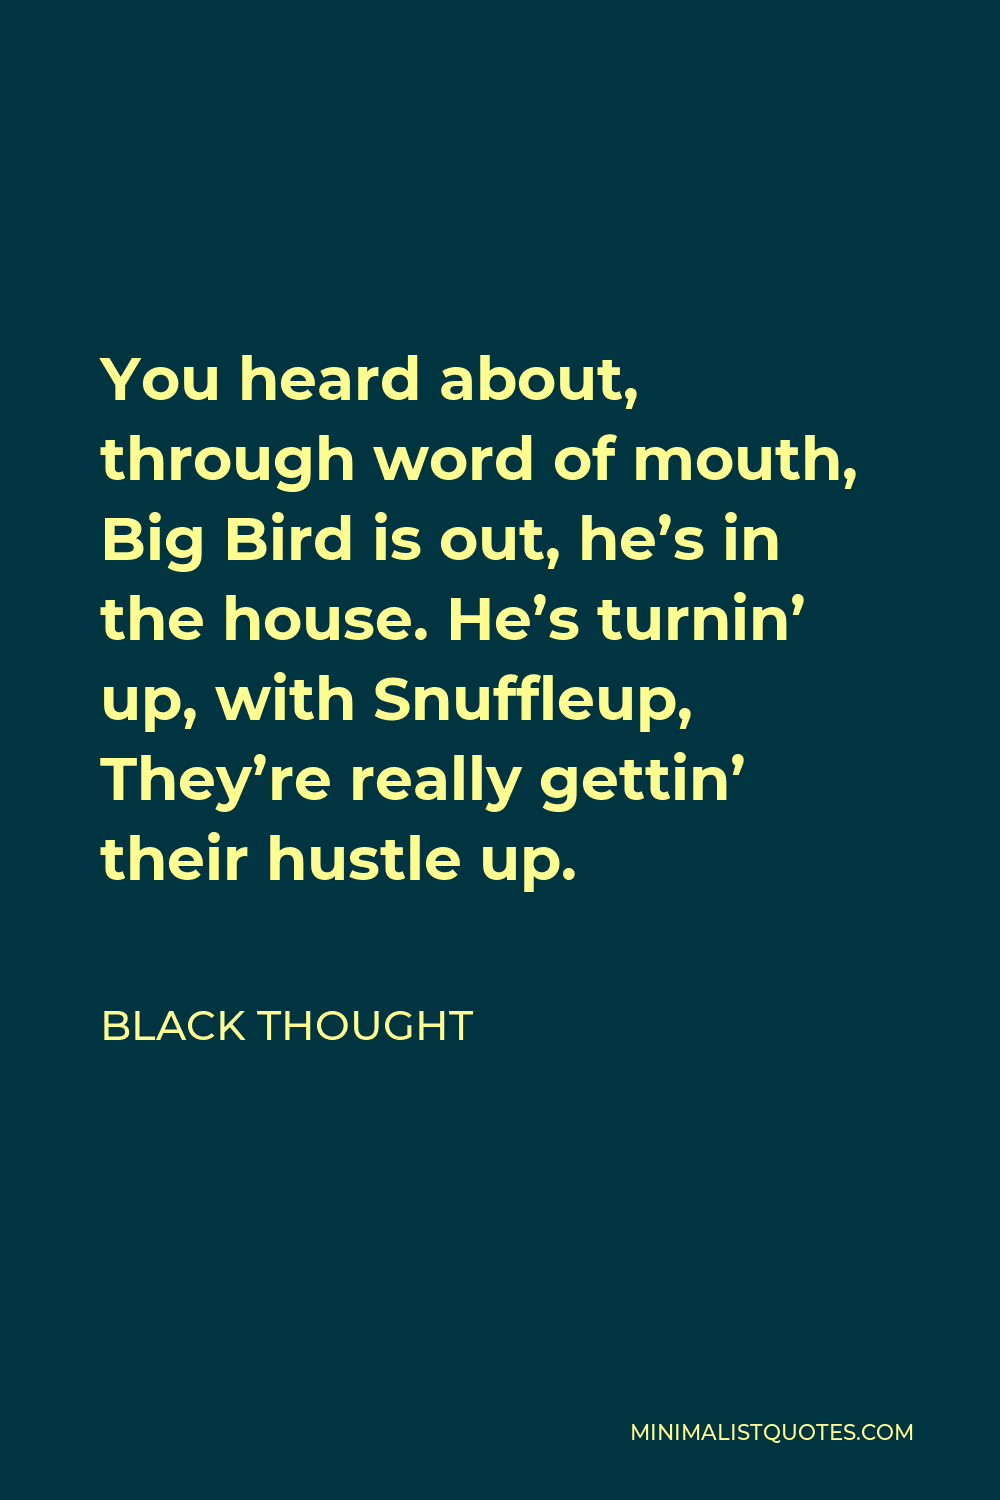 Black Thought Quote - You heard about, through word of mouth, Big Bird is out, he’s in the house. He’s turnin’ up, with Snuffleup, They’re really gettin’ their hustle up.